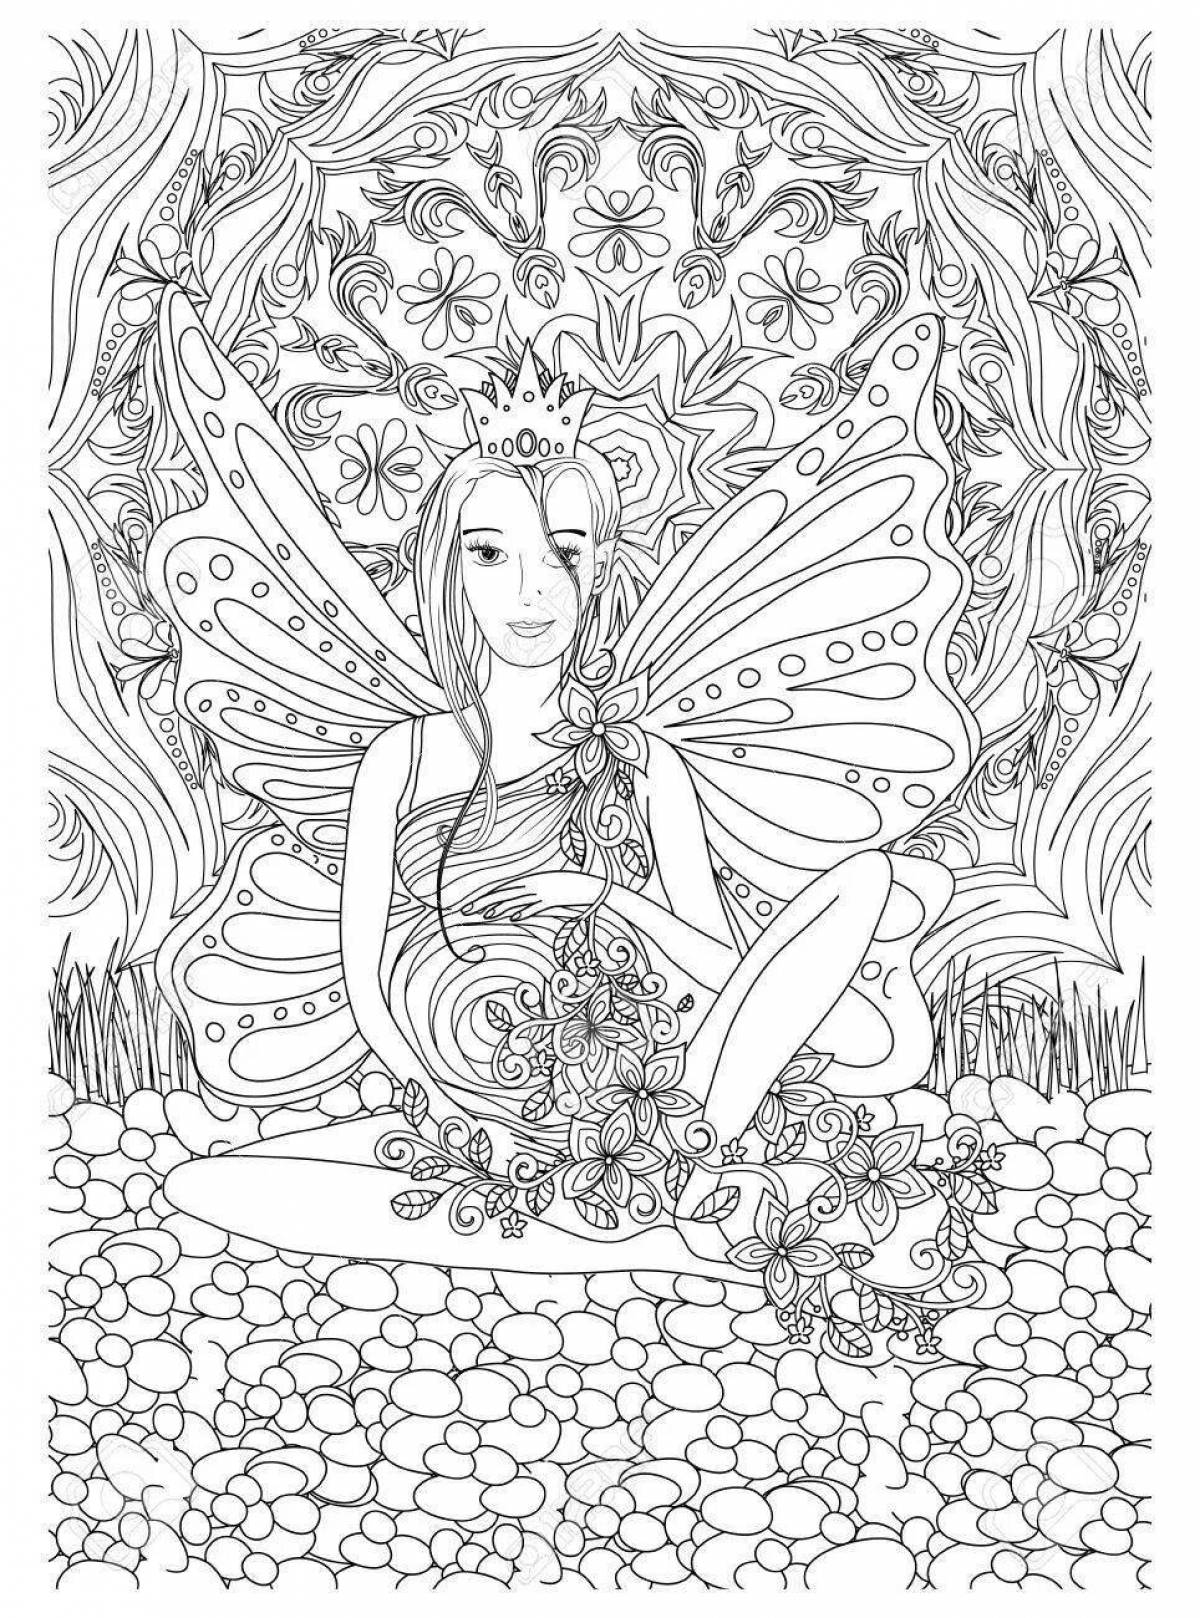 Refreshing maternity coloring book